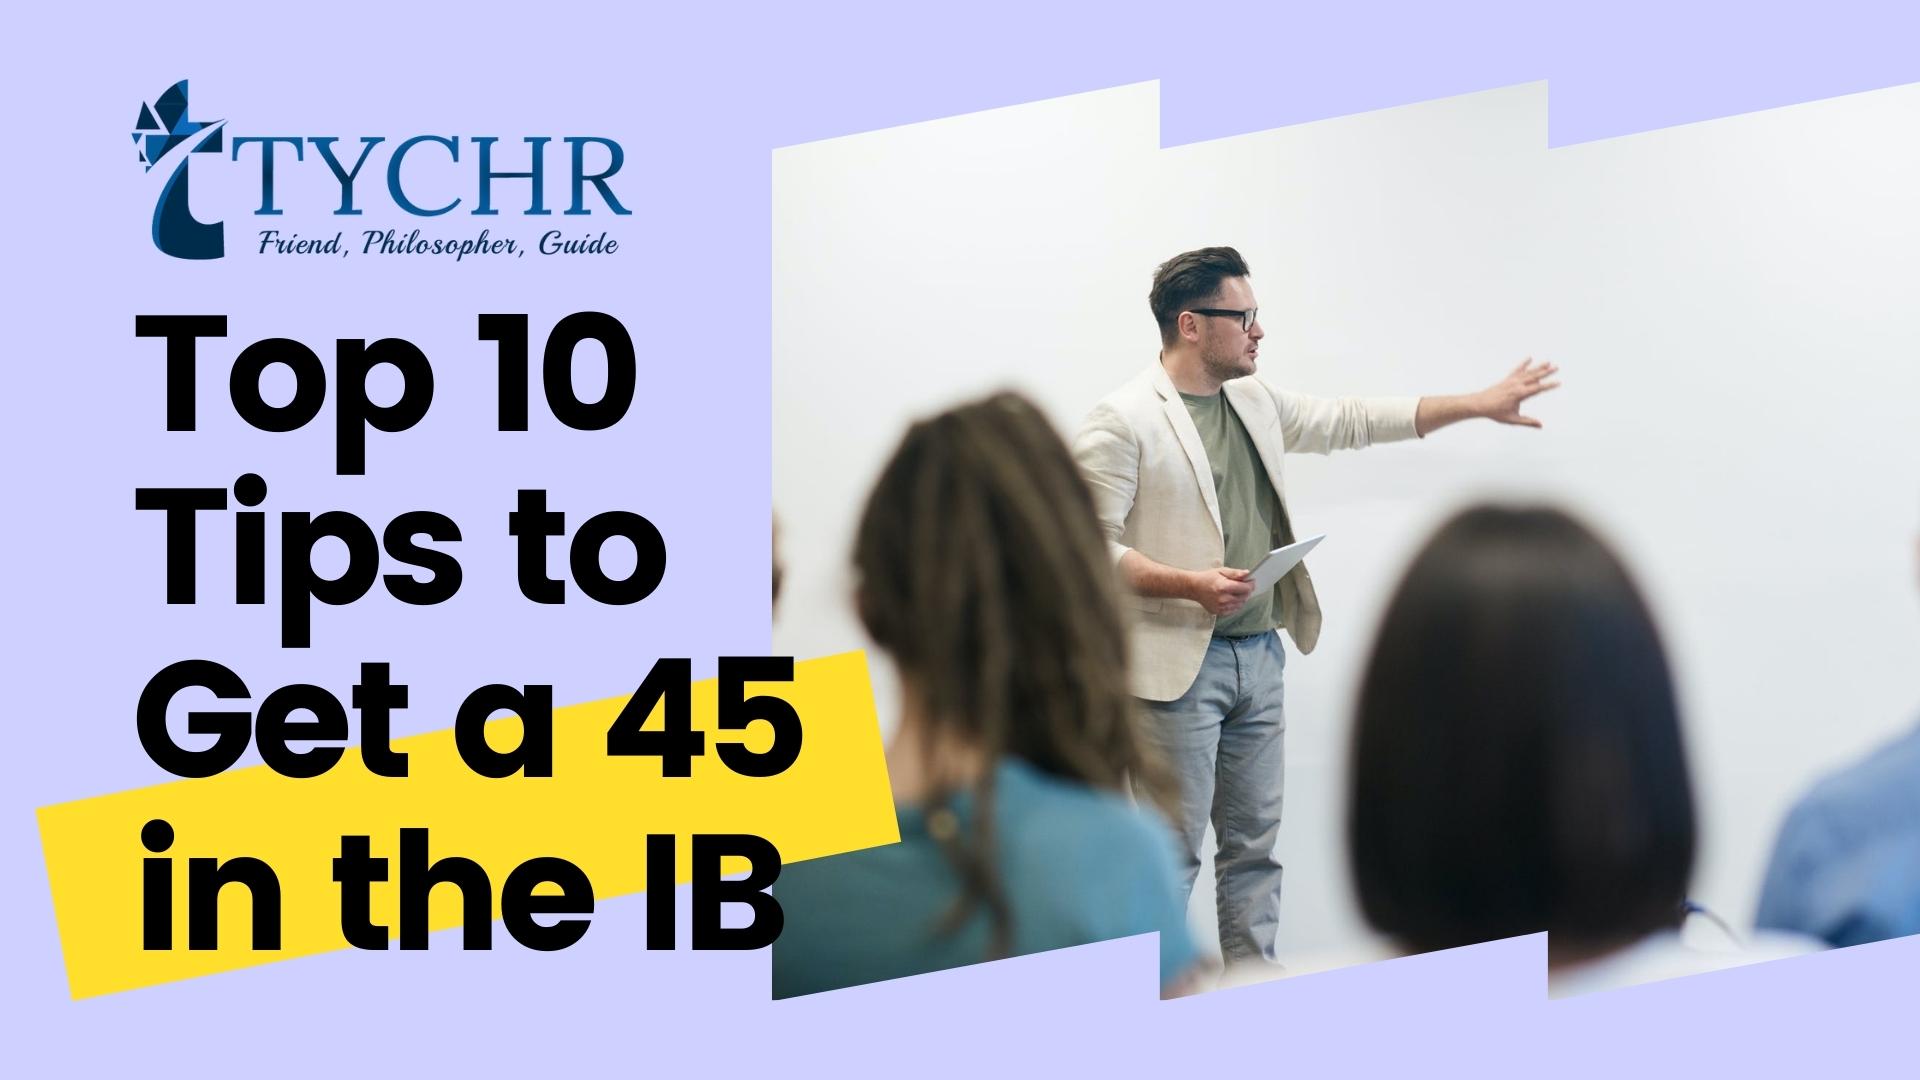 You are currently viewing Top 10 Tips to Get a 45 in the IB